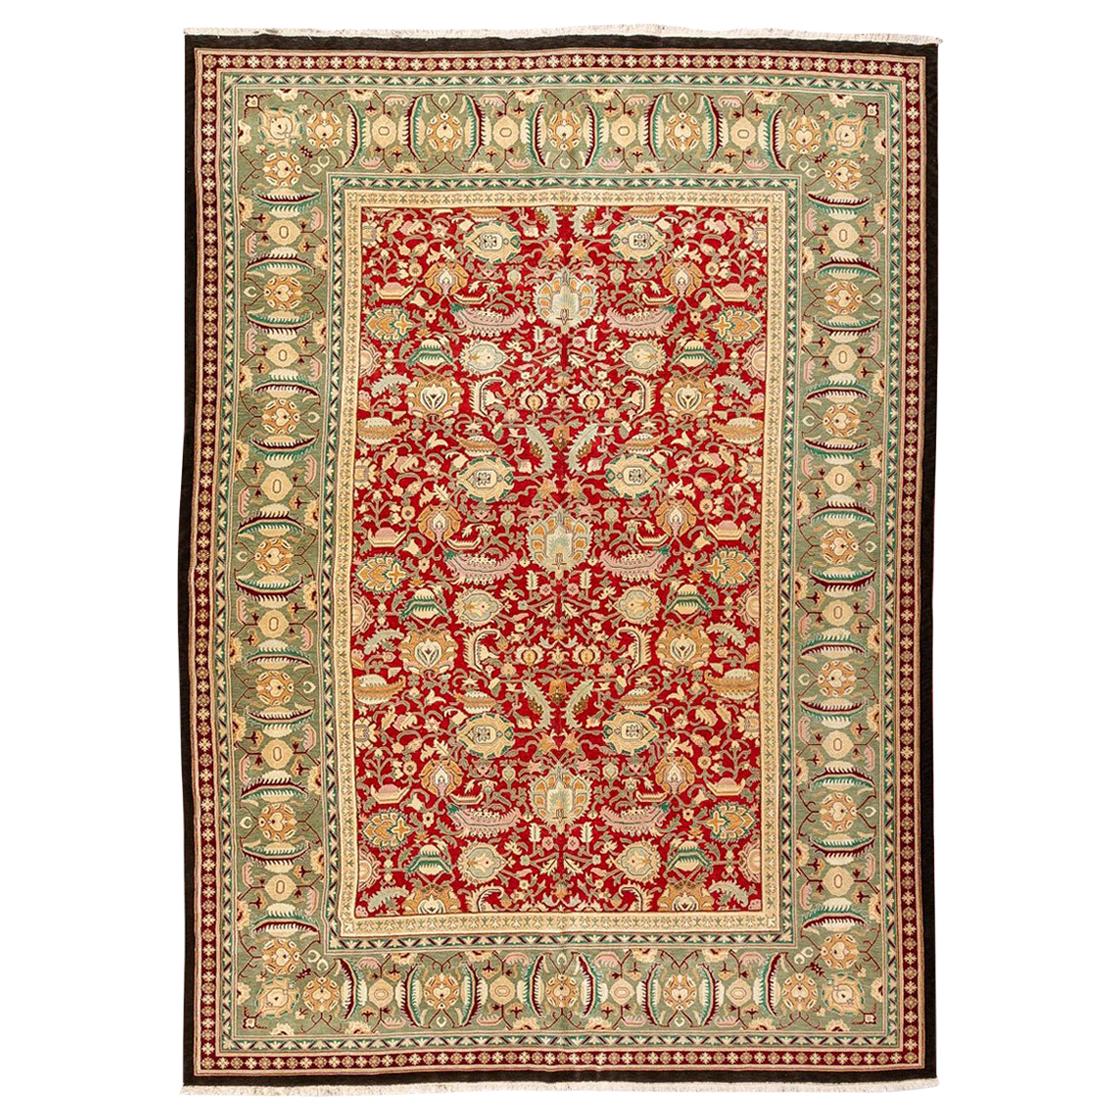 Classic Rug Agra of Palmts and Interlaced Flowers Wool Handmade